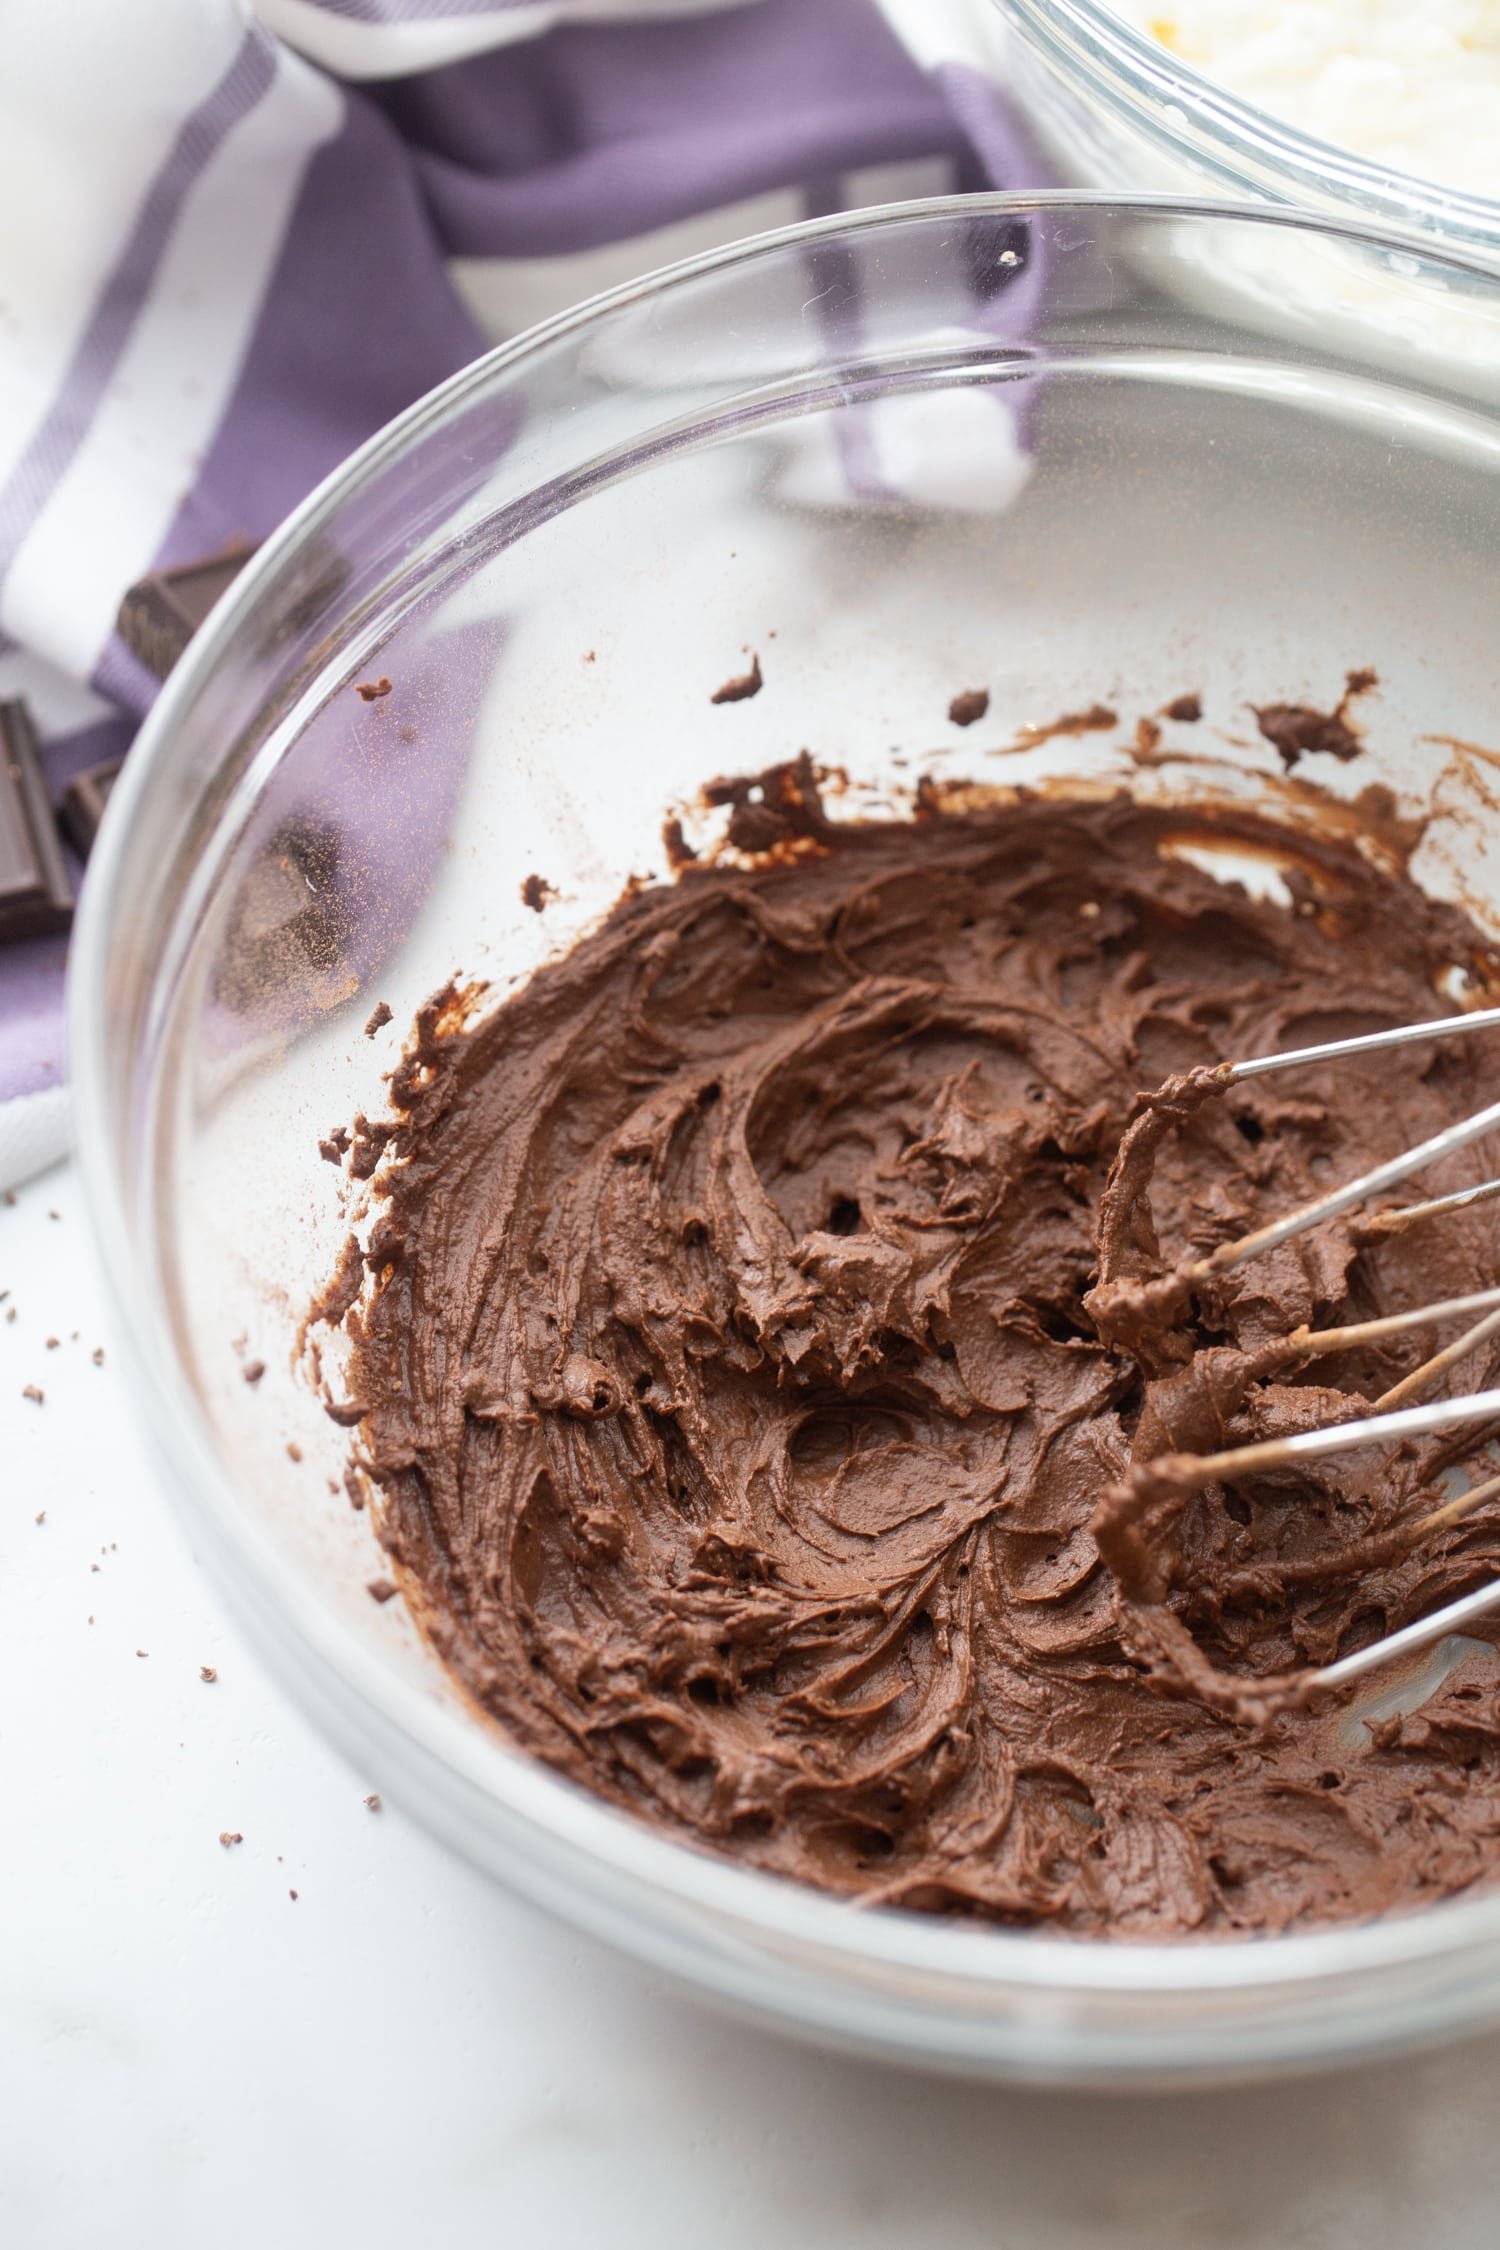 Image of chocolate mousse being mixed together with electric mixer in glass mixing bowl